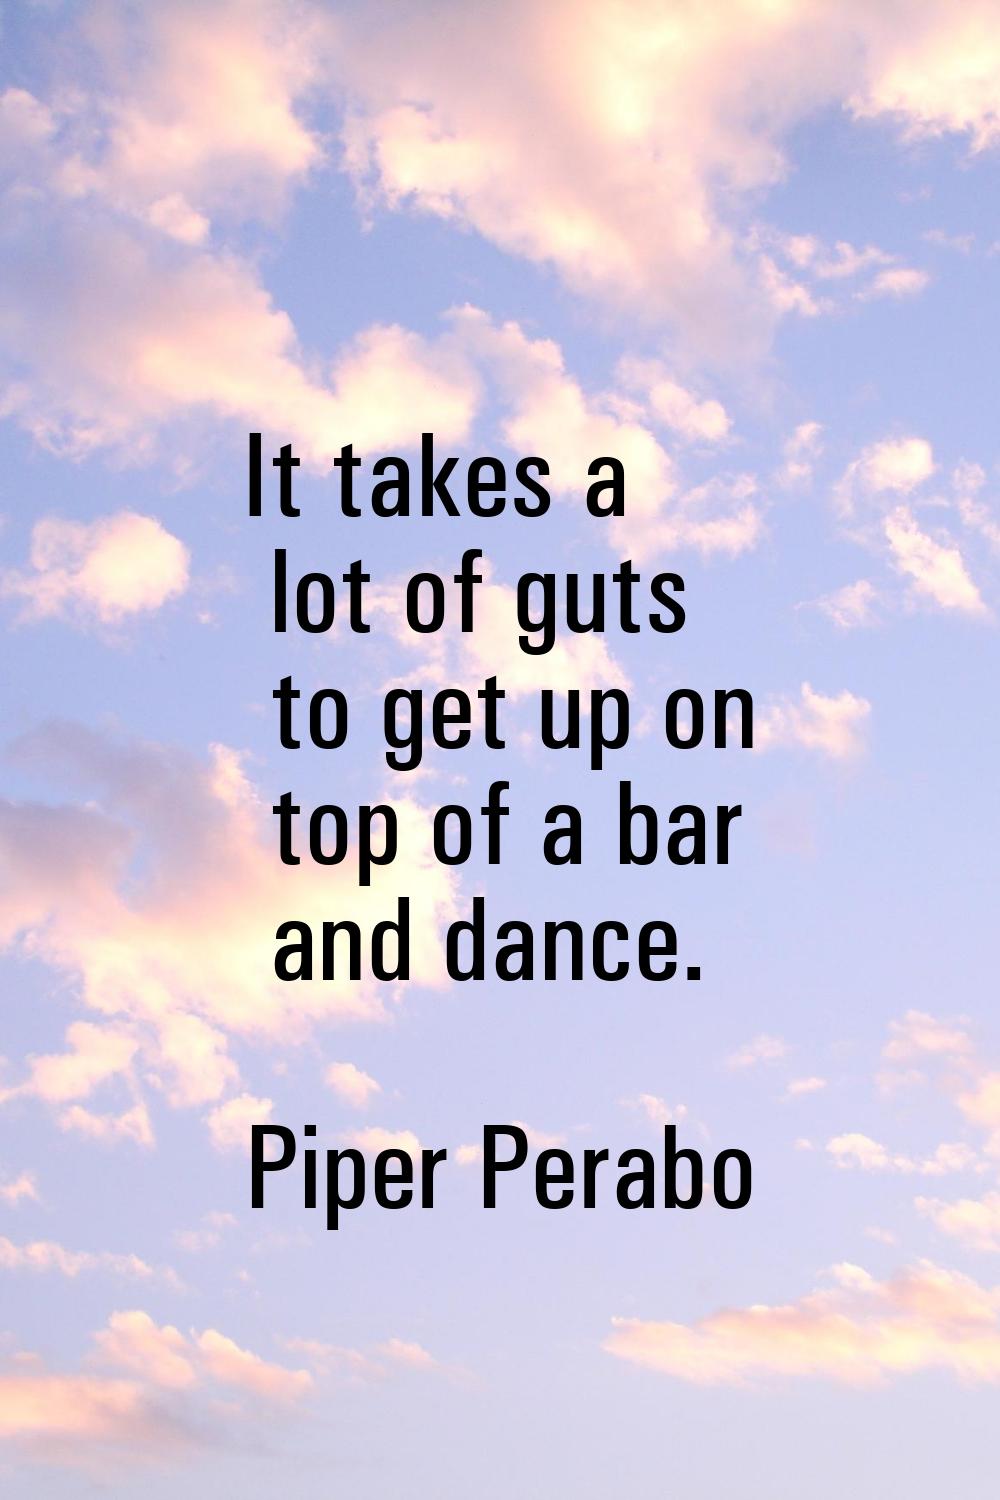 It takes a lot of guts to get up on top of a bar and dance.